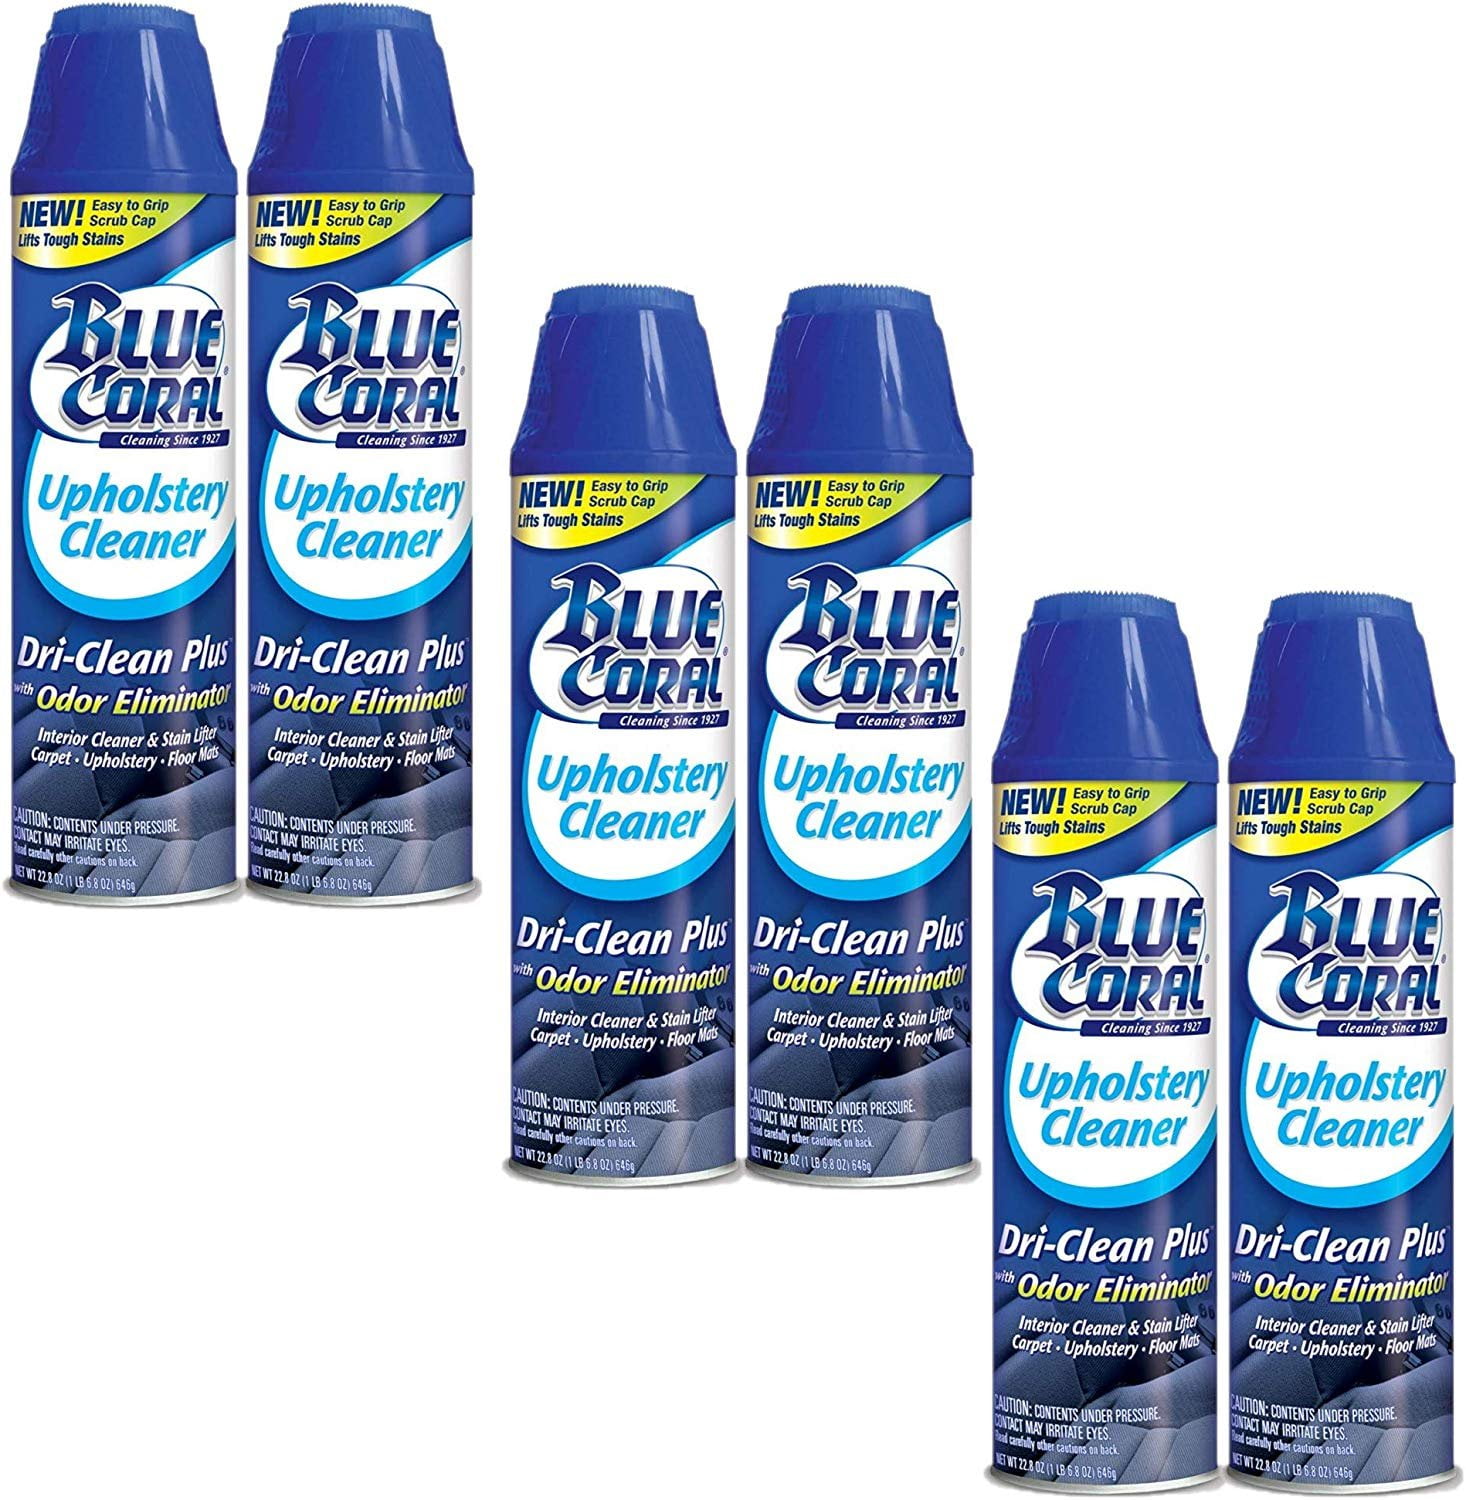 Blue Coral DC22 Upholstery Cleaner DriClean Plus with Odor Eliminator, 22.8 oz. Aerosol (6 Pack